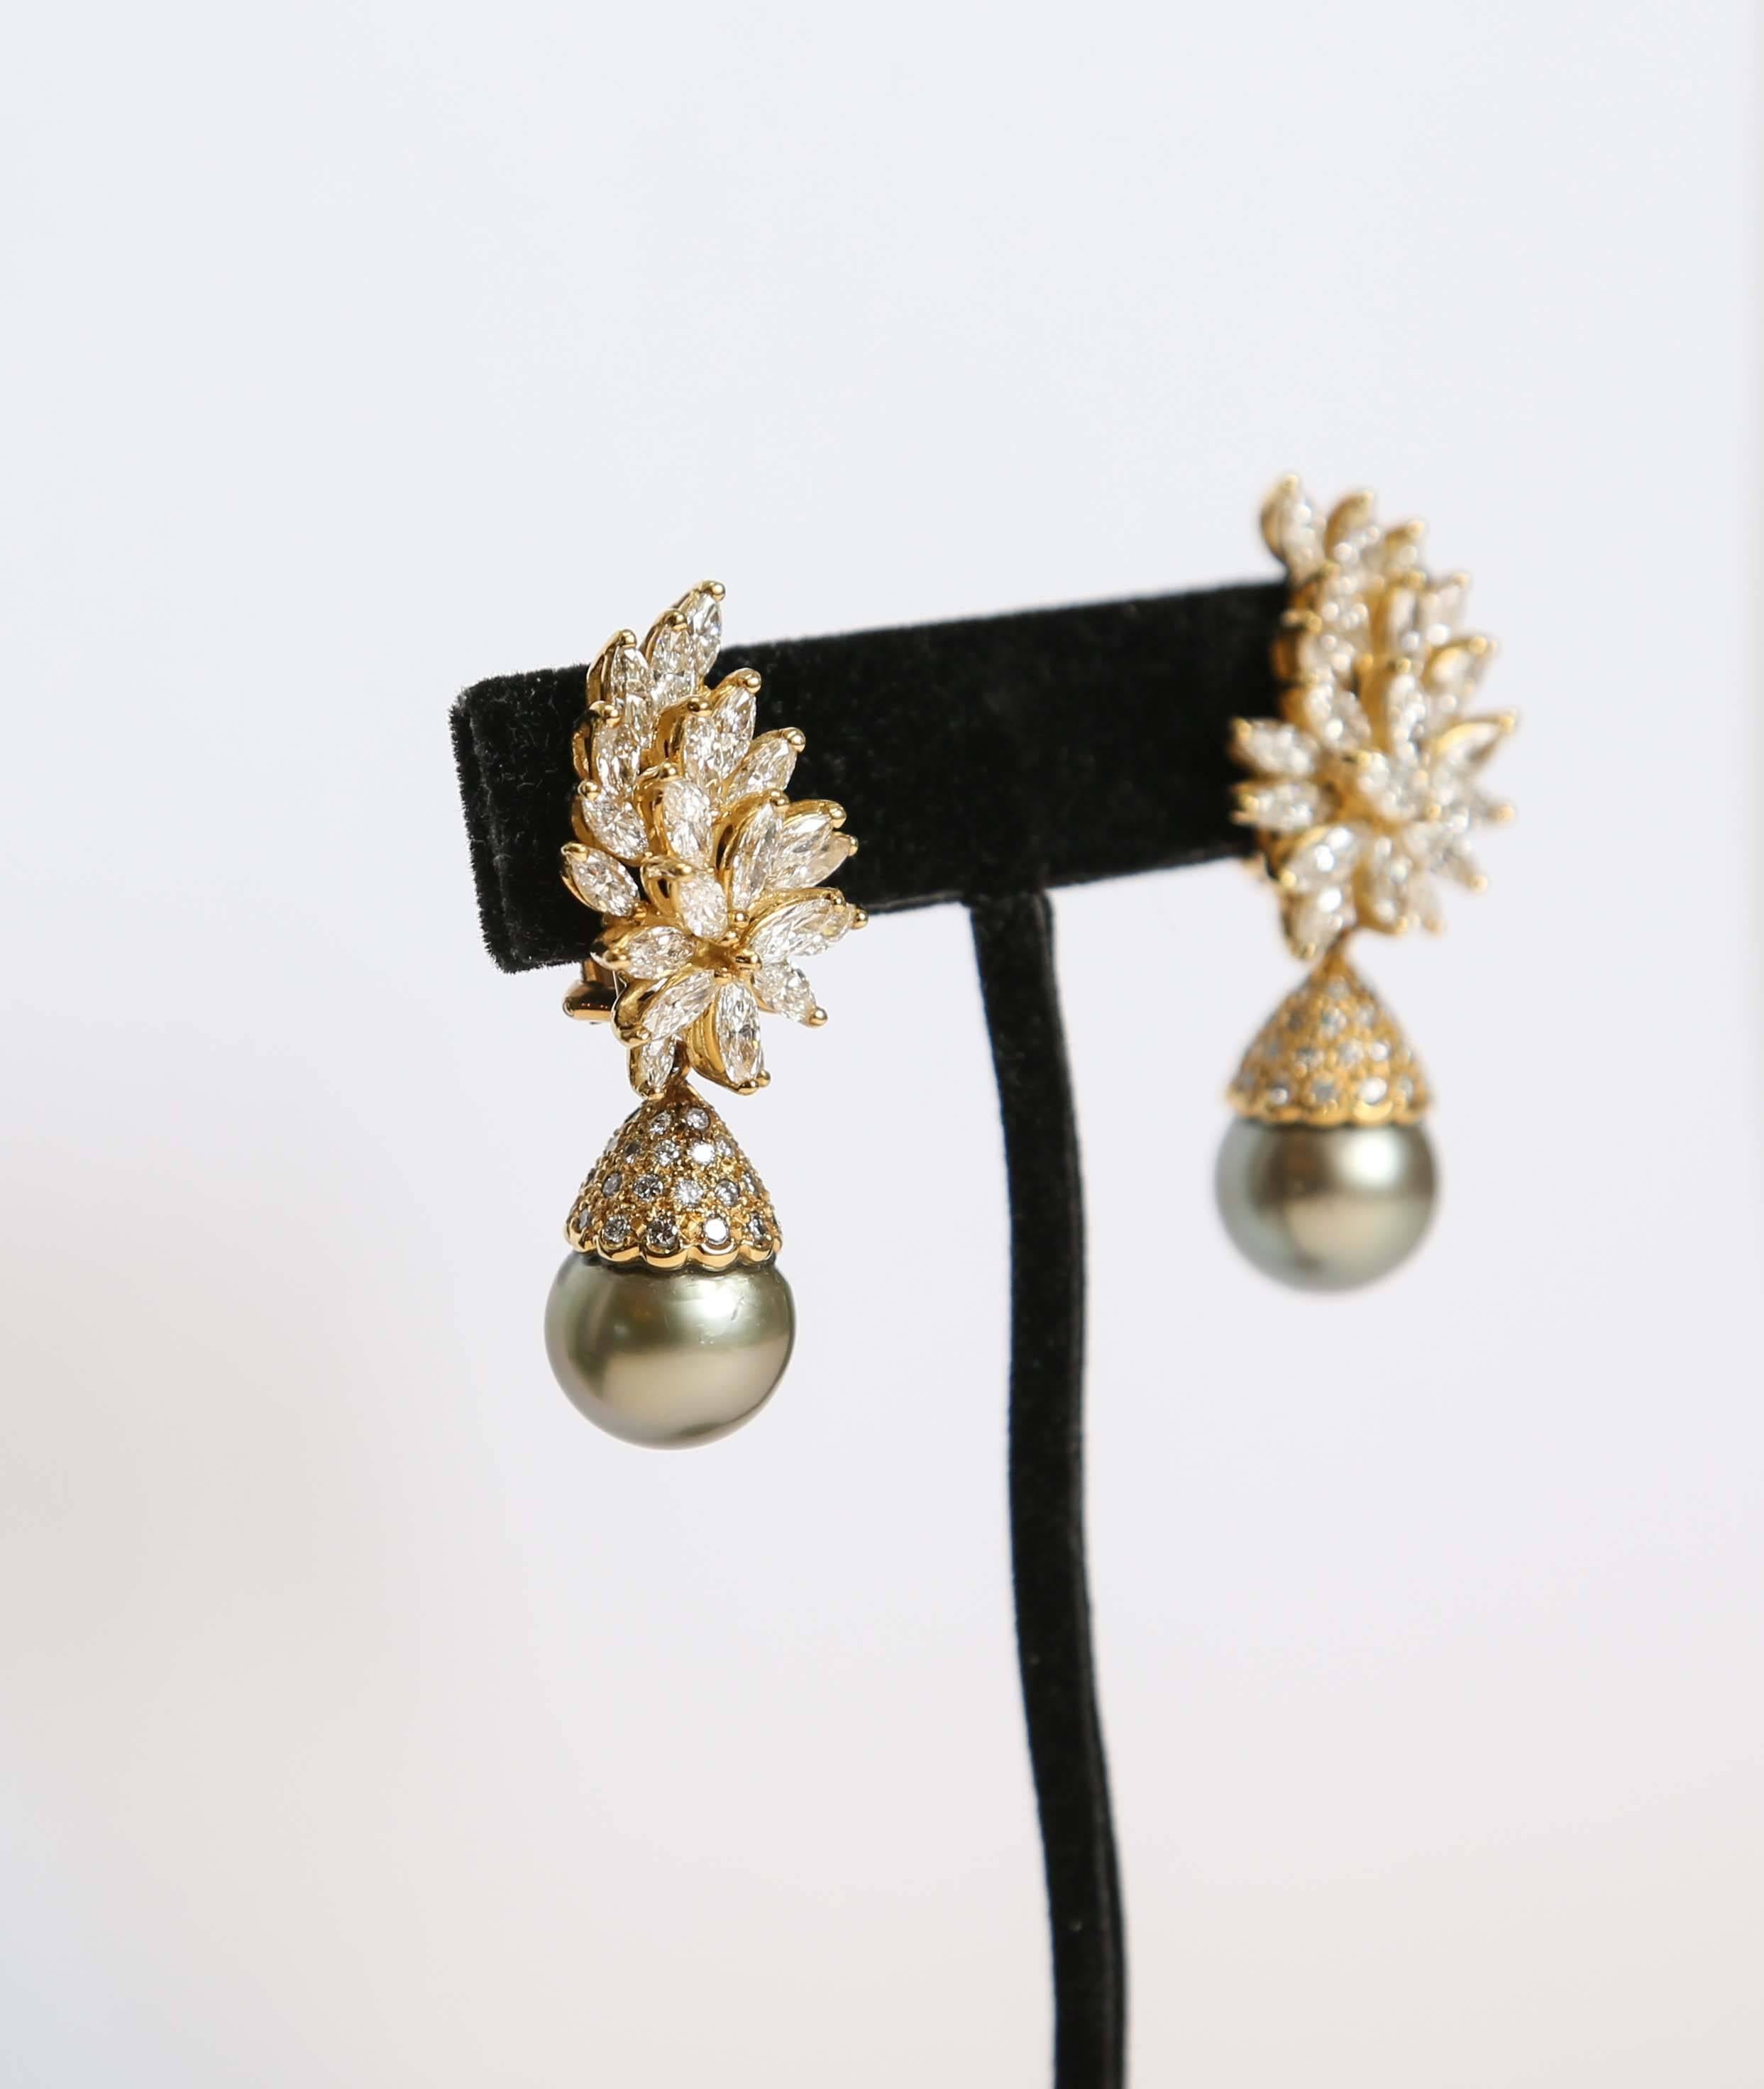 Stunning pair of 18-karat yellow gold earrings with Tahitian black cultured pearls. 6.82-karats of diamonds. Pearls can be detached from earrings.